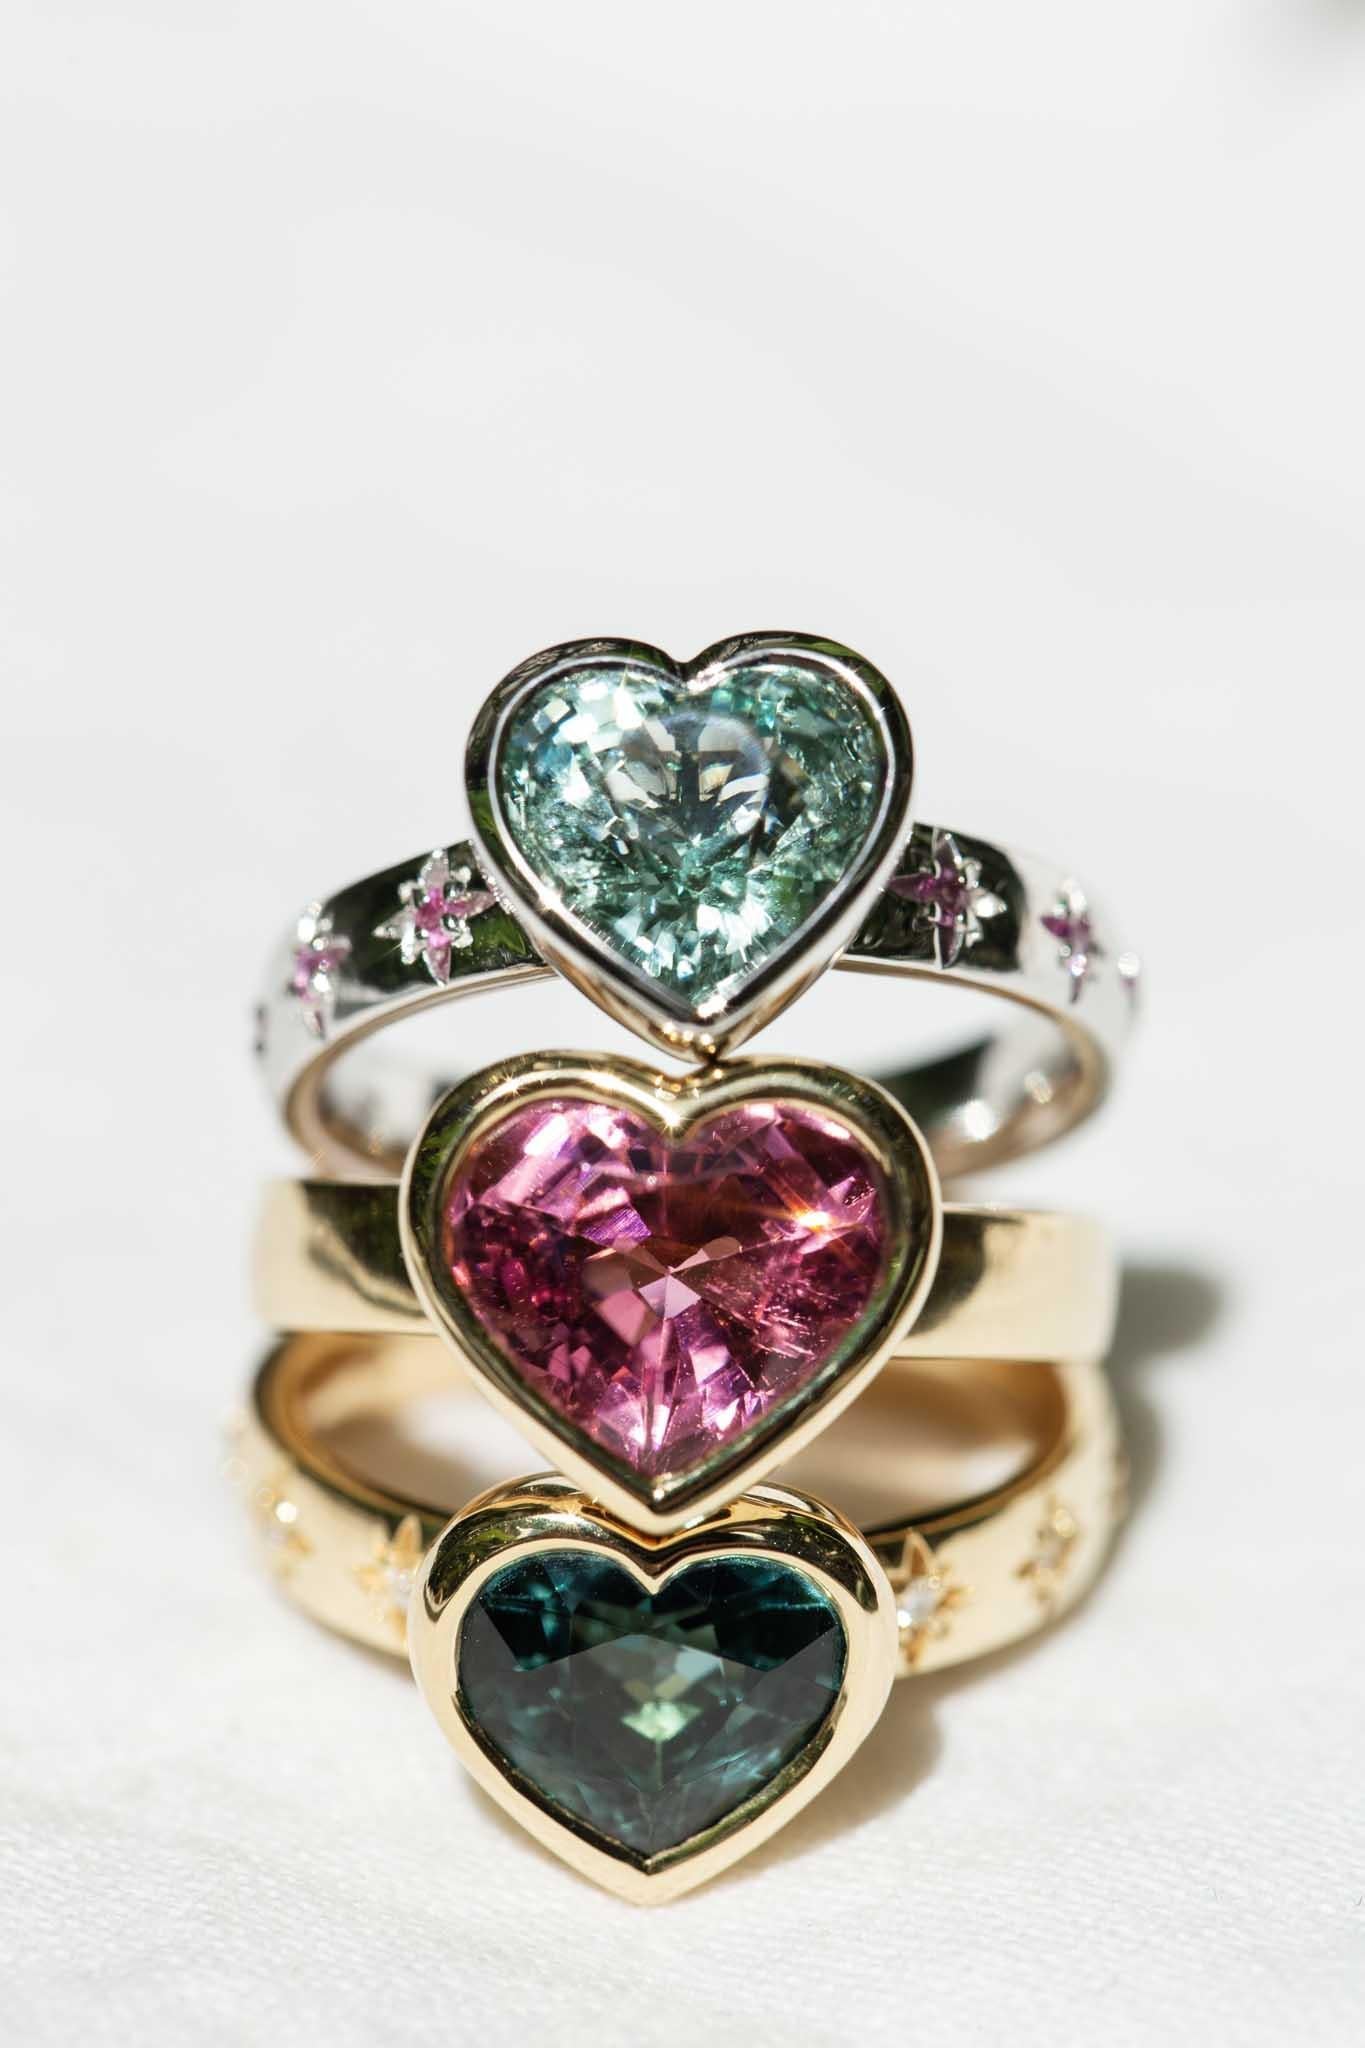 LOVE, BEGOTTEN
 
thawing out
my heart of frost
a love for you
not ever lost
 
The enchanting Cerys ring features a rapturous sea foam greenish-blue heart cut aquamarine on a shimmering pink sapphire-set band. She is an exquisite expression of love